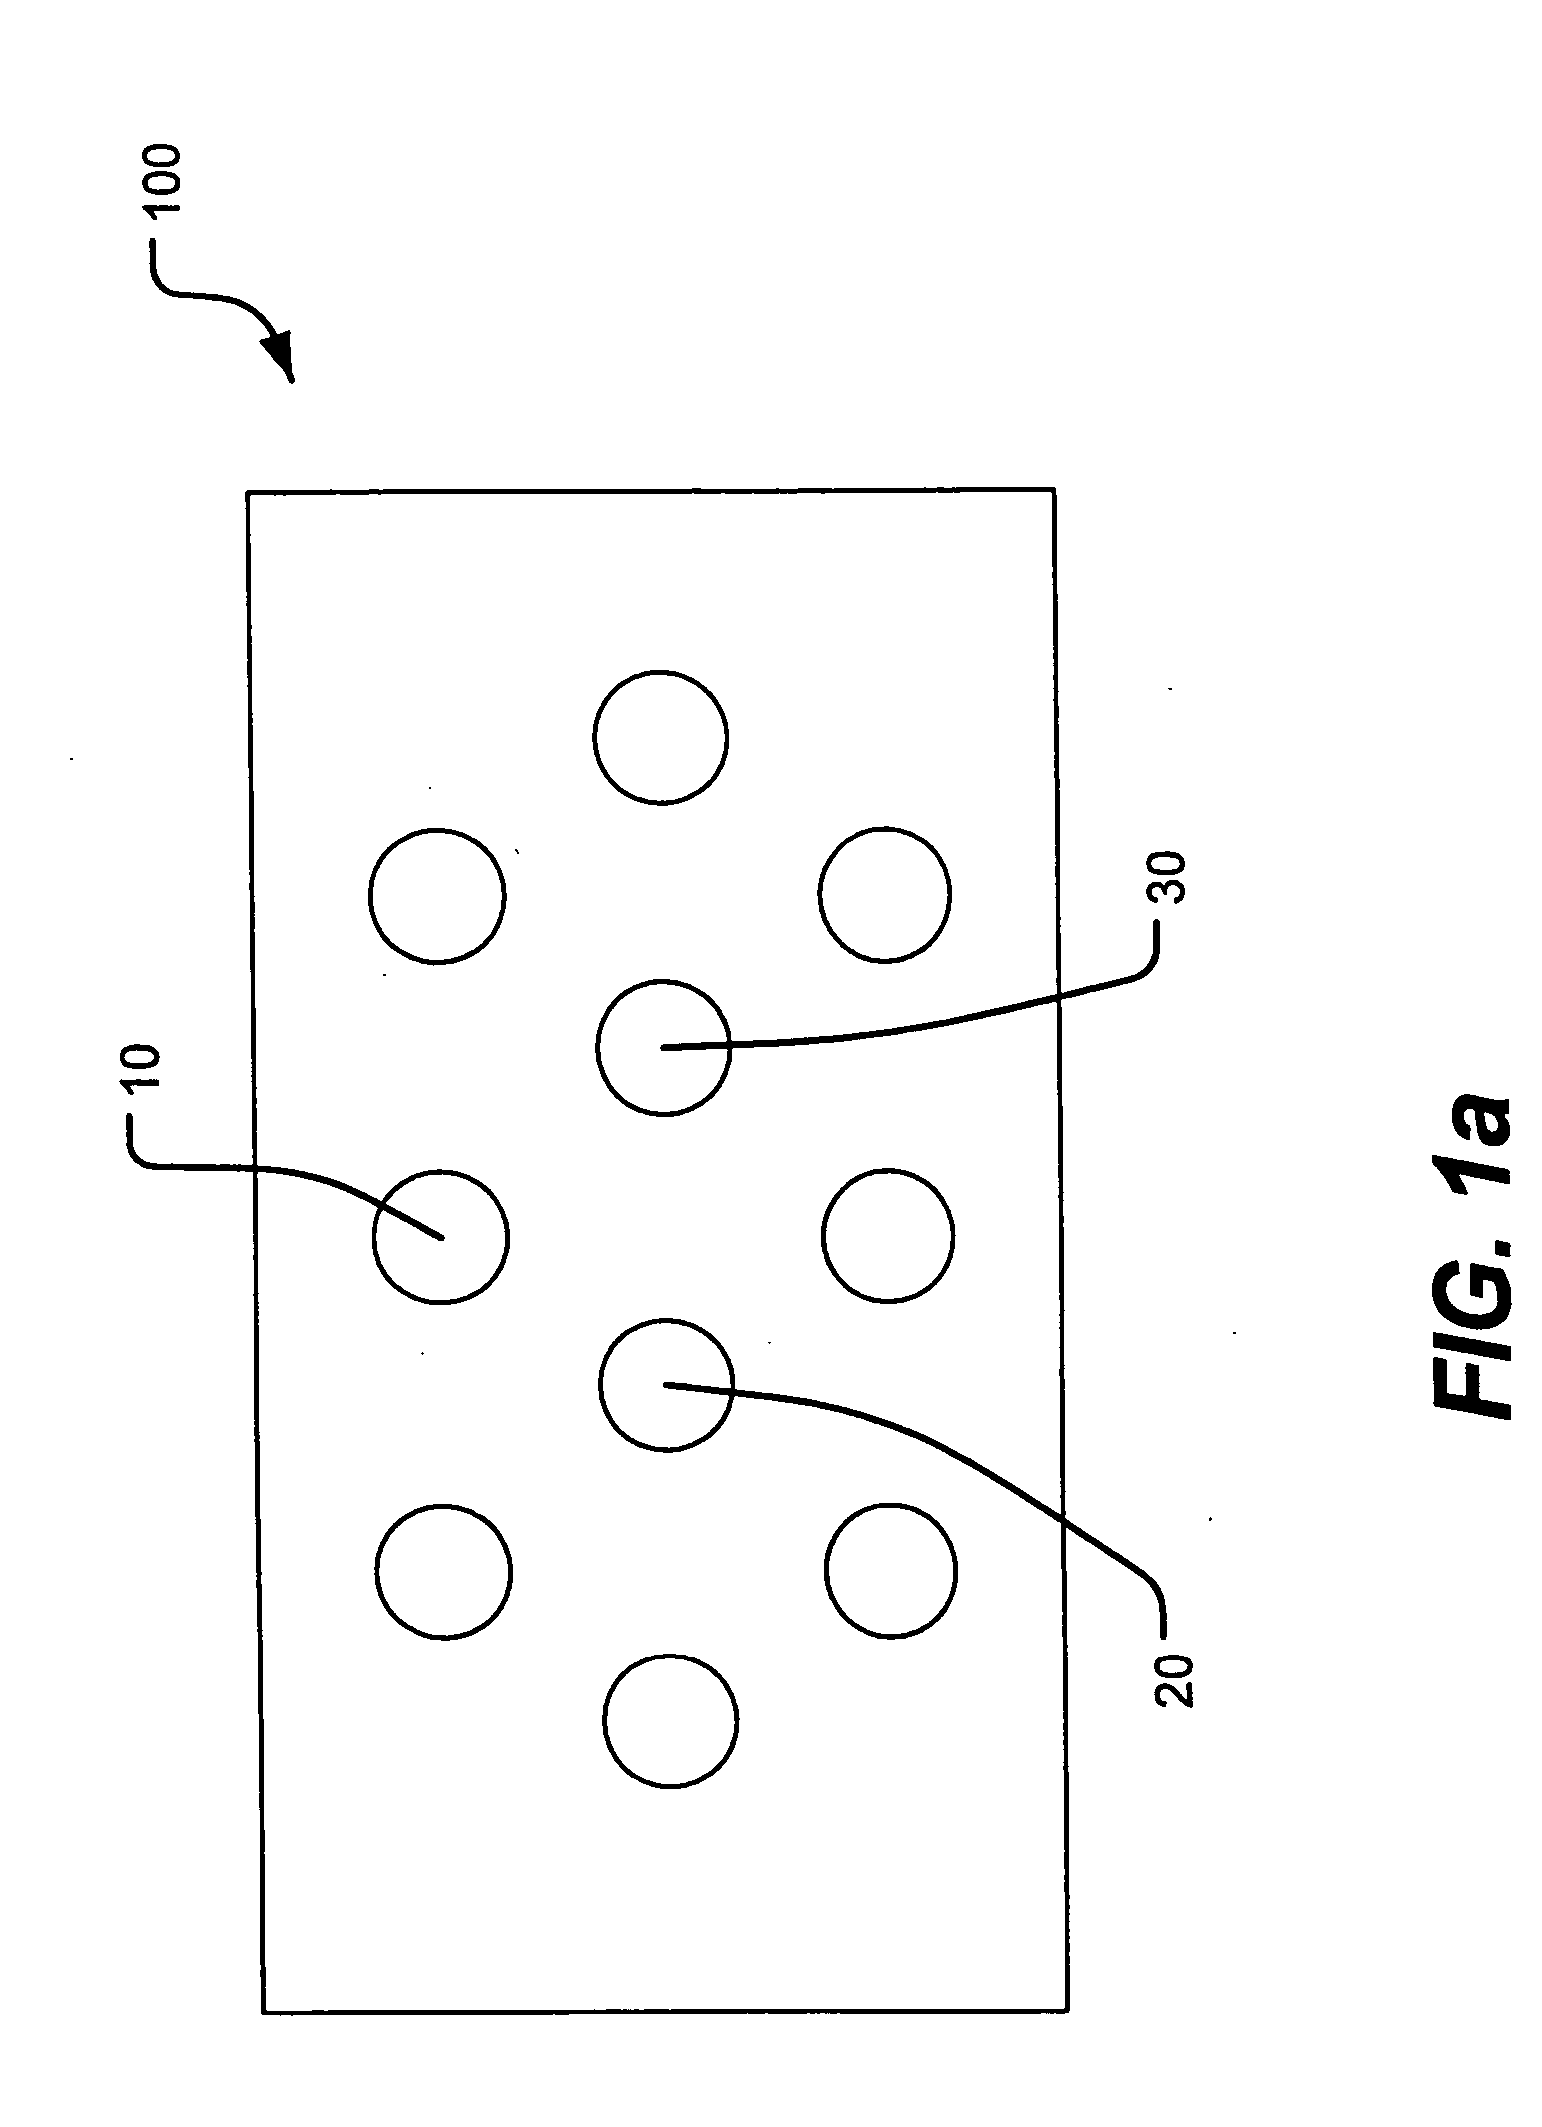 Mutual coupling method for calibrating a phased array